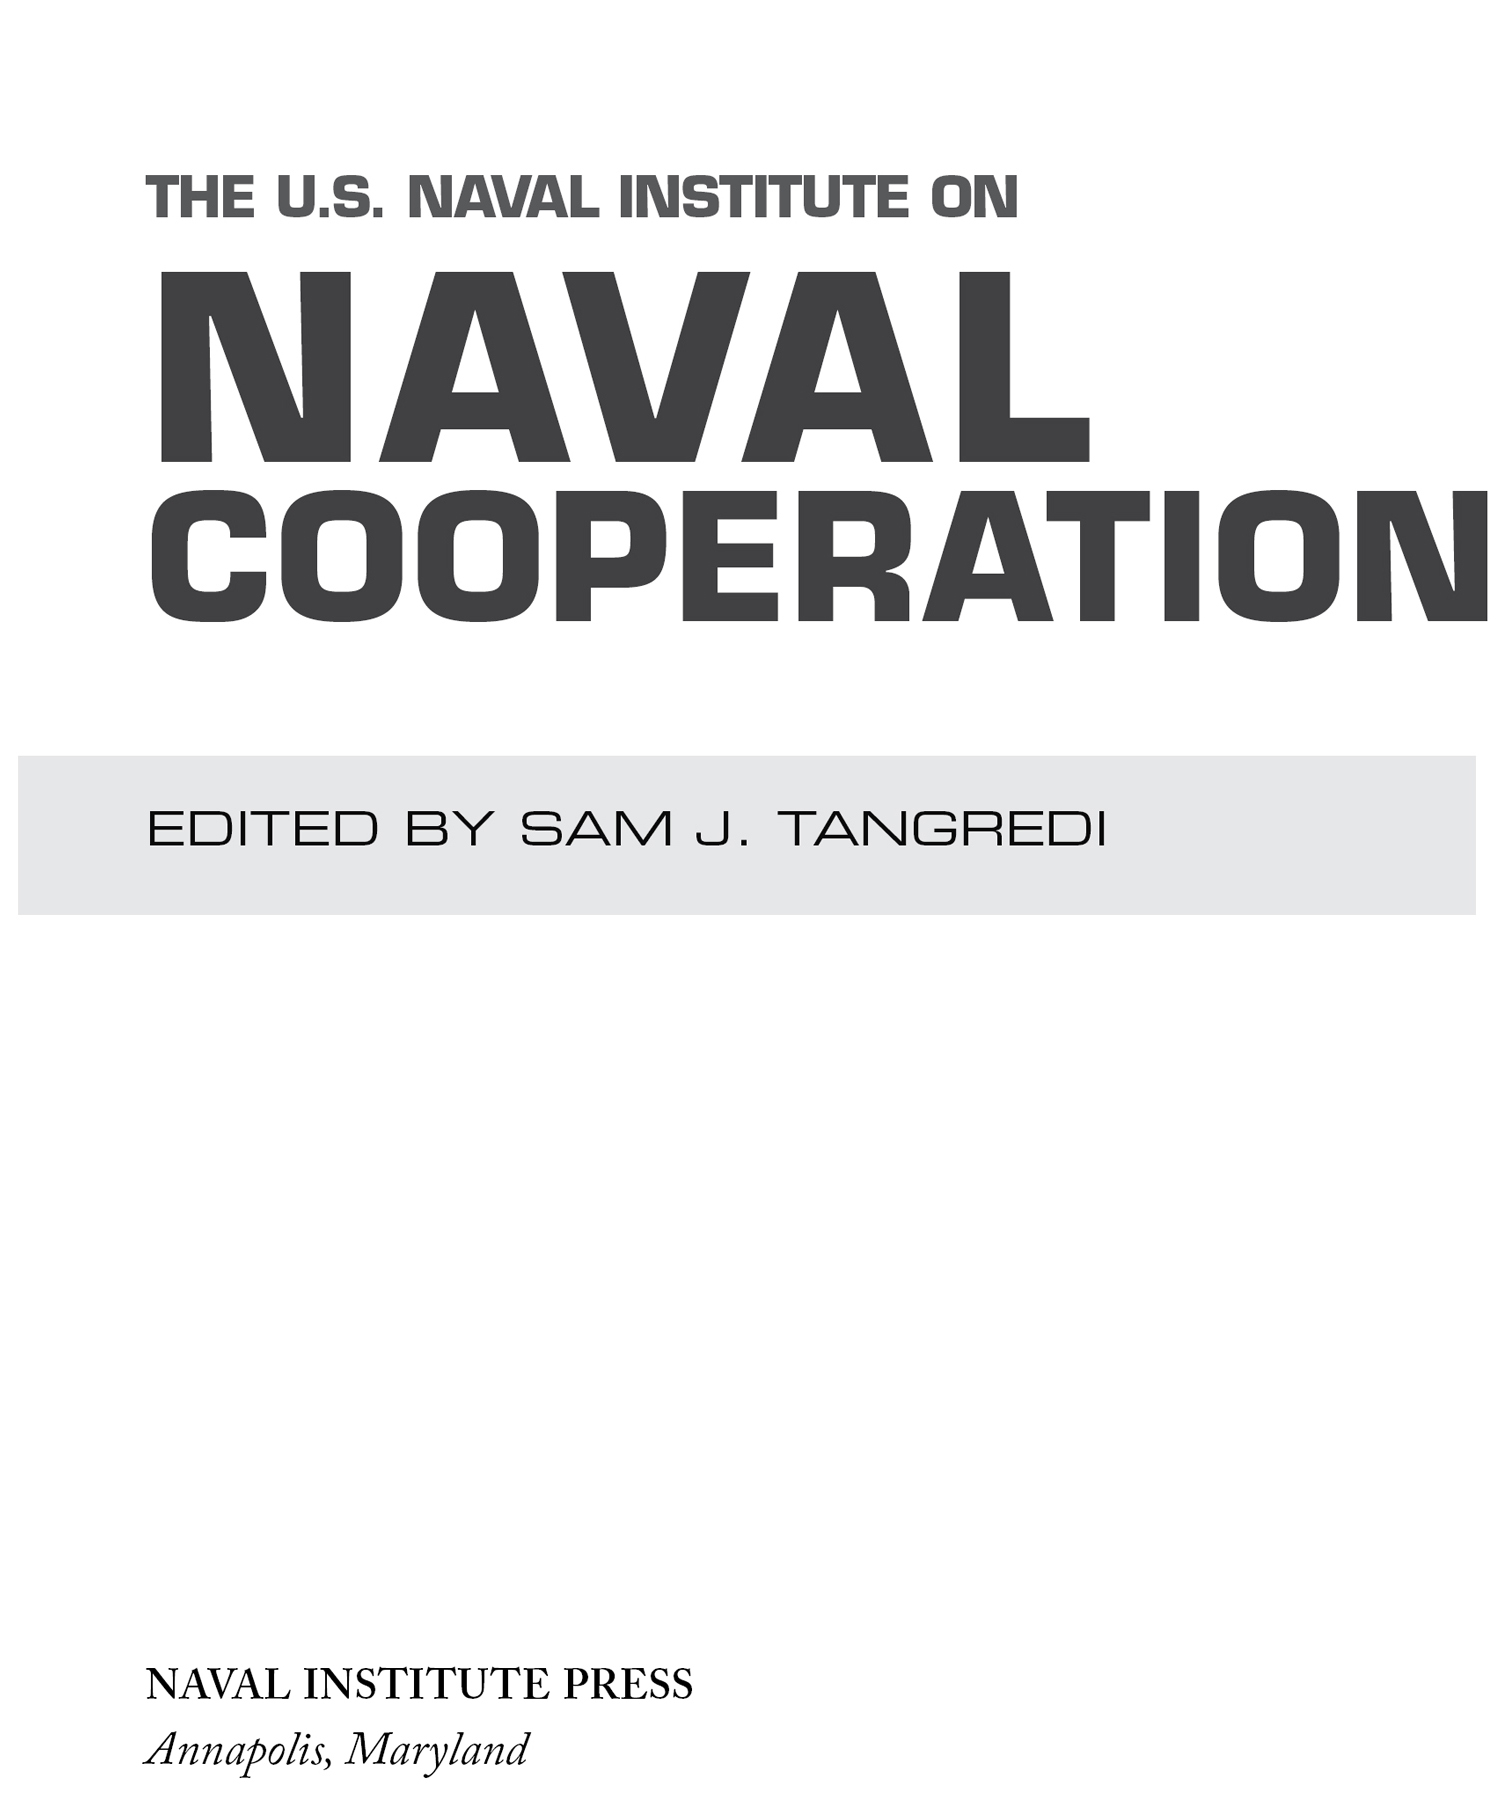 Naval Institute Press 291 Wood Road Annapolis MD 21402 2015 by the US Naval - photo 4